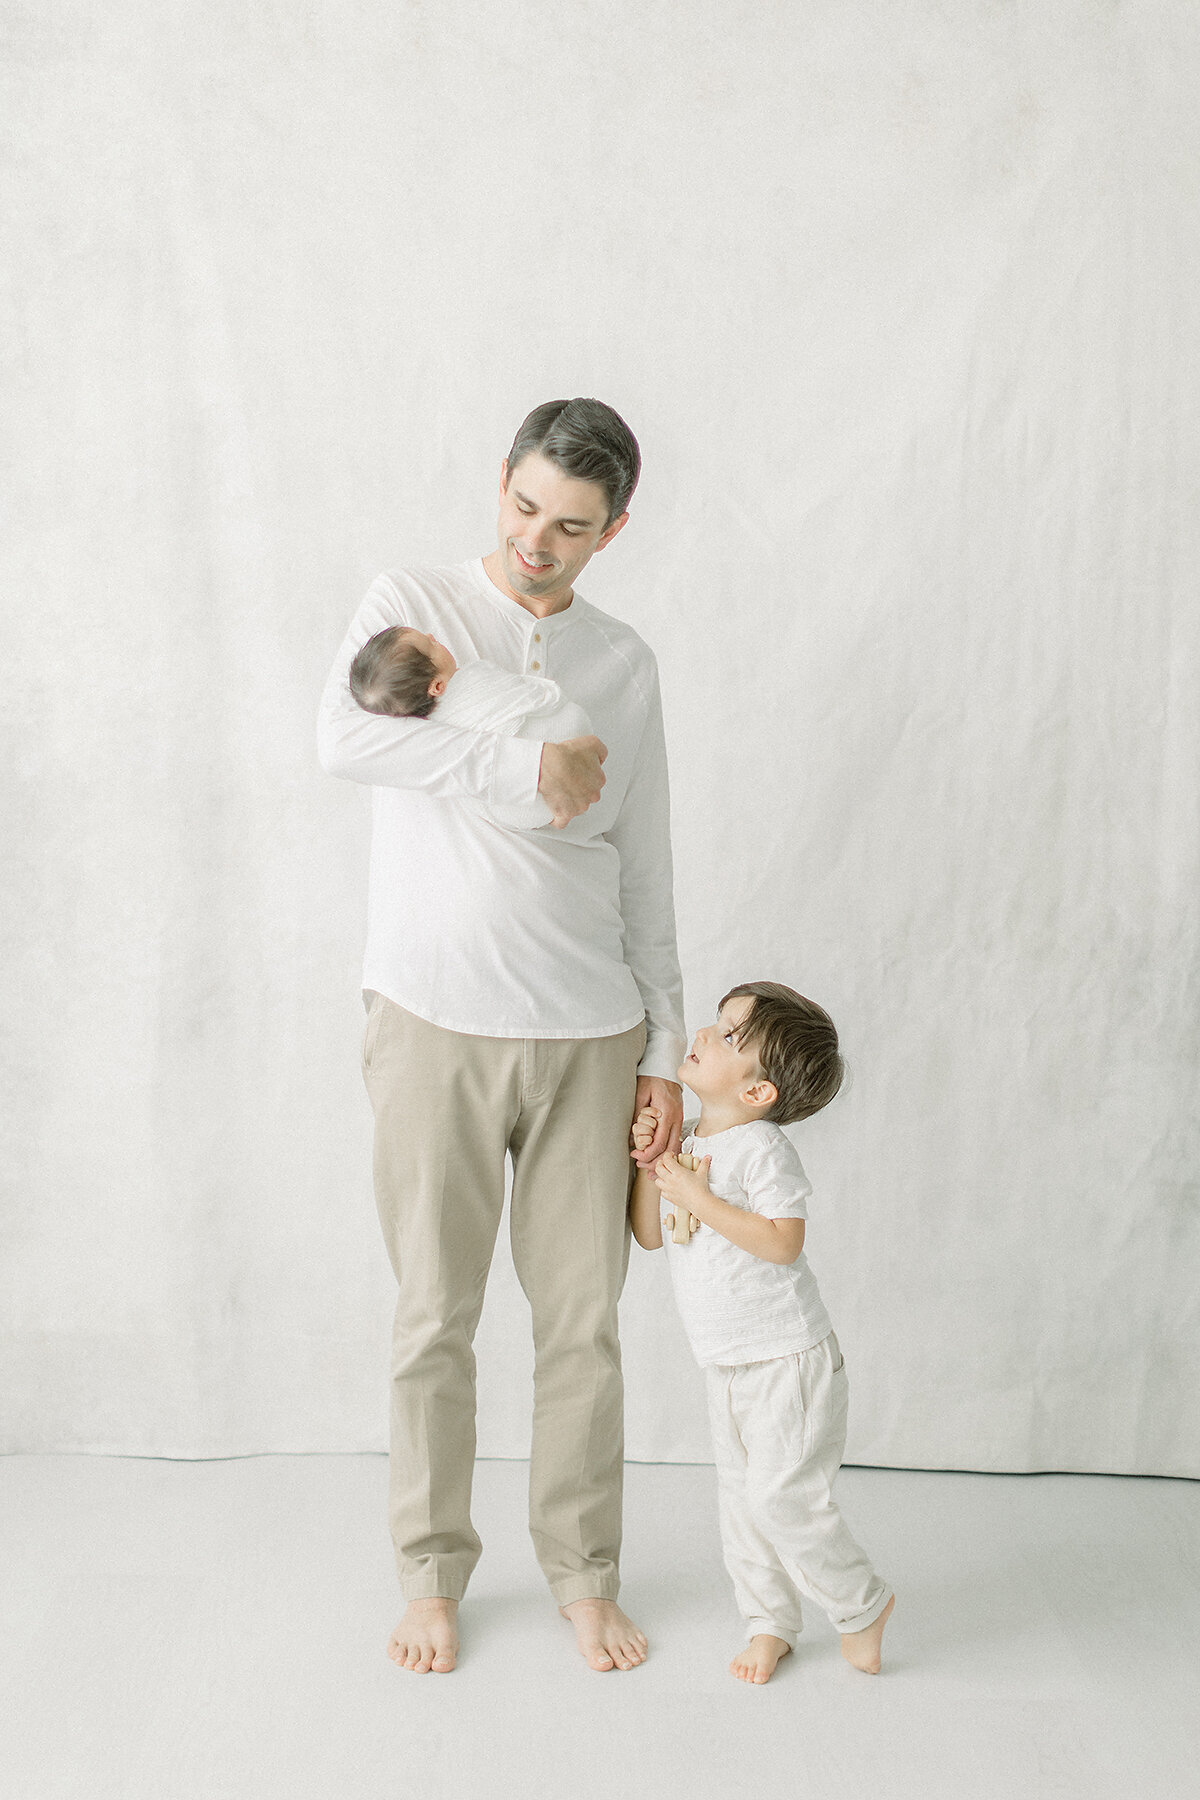 A light filled family portrait of a dad holding his newborn baby with his toddler son by his side as they take their new family photos in a photography studio by Dallas/Fort Worth, TX.